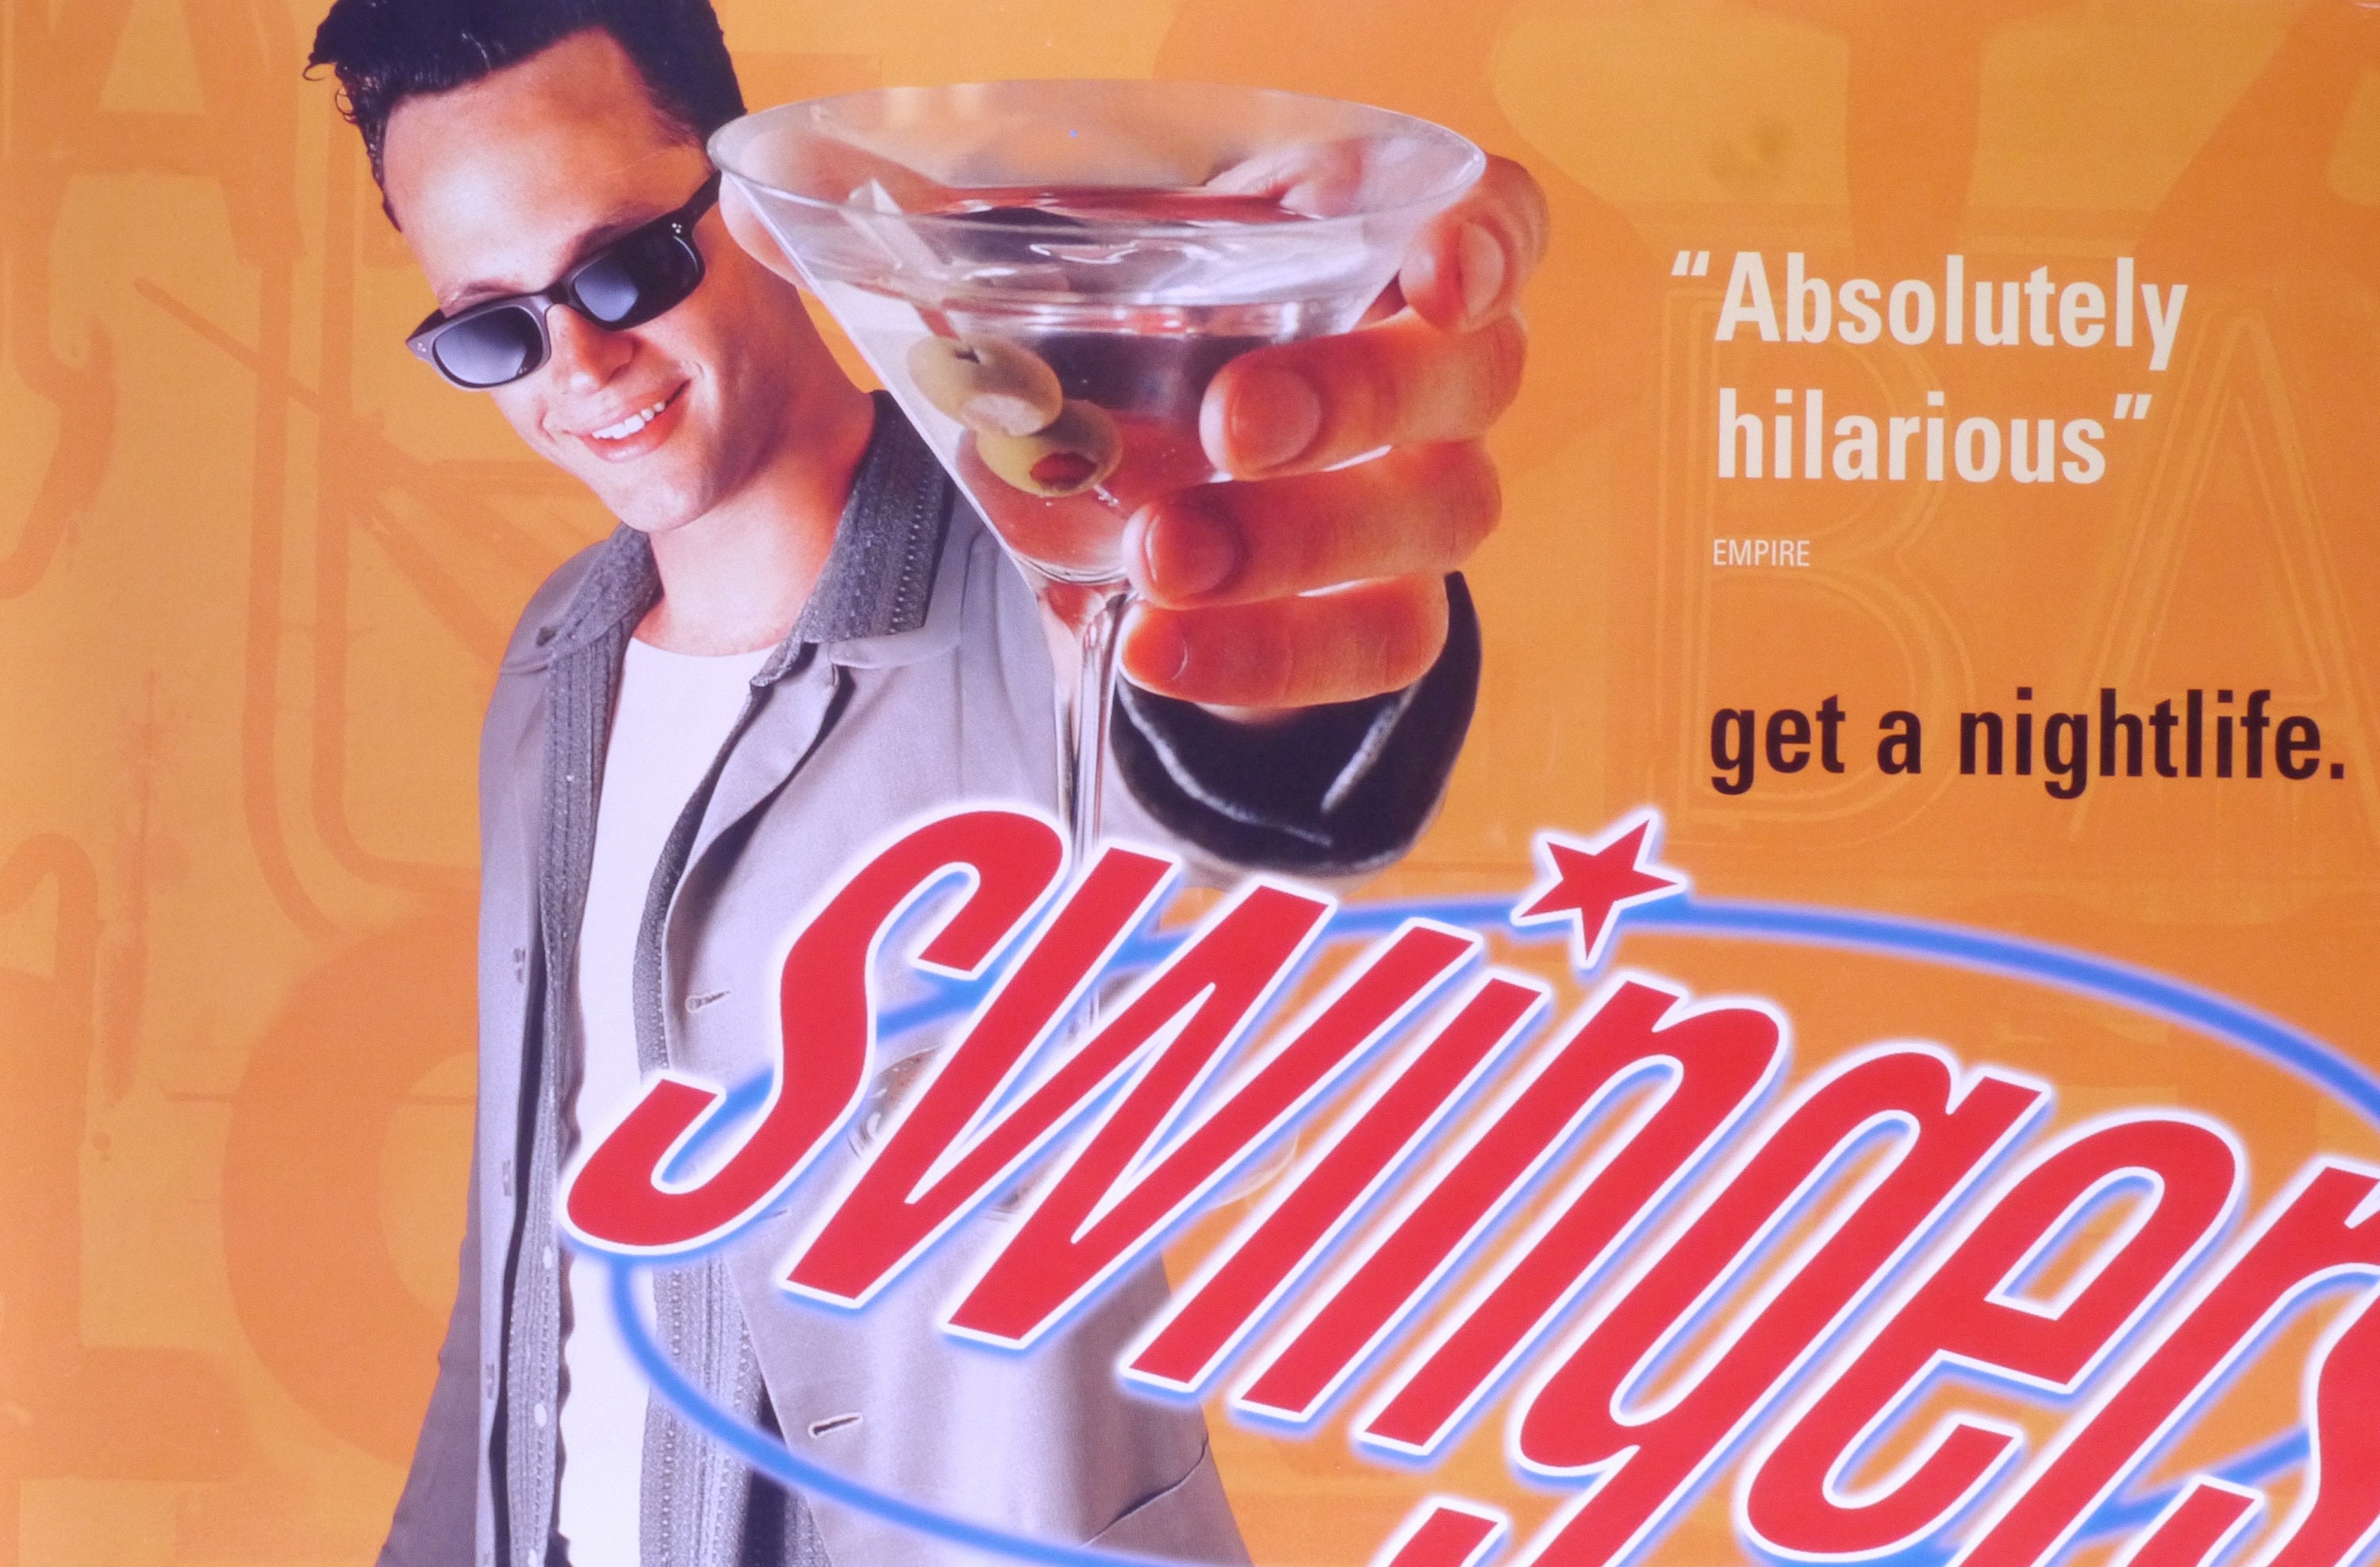 Swingers-an Original Vintage Movie Poster for Doug Liman pic